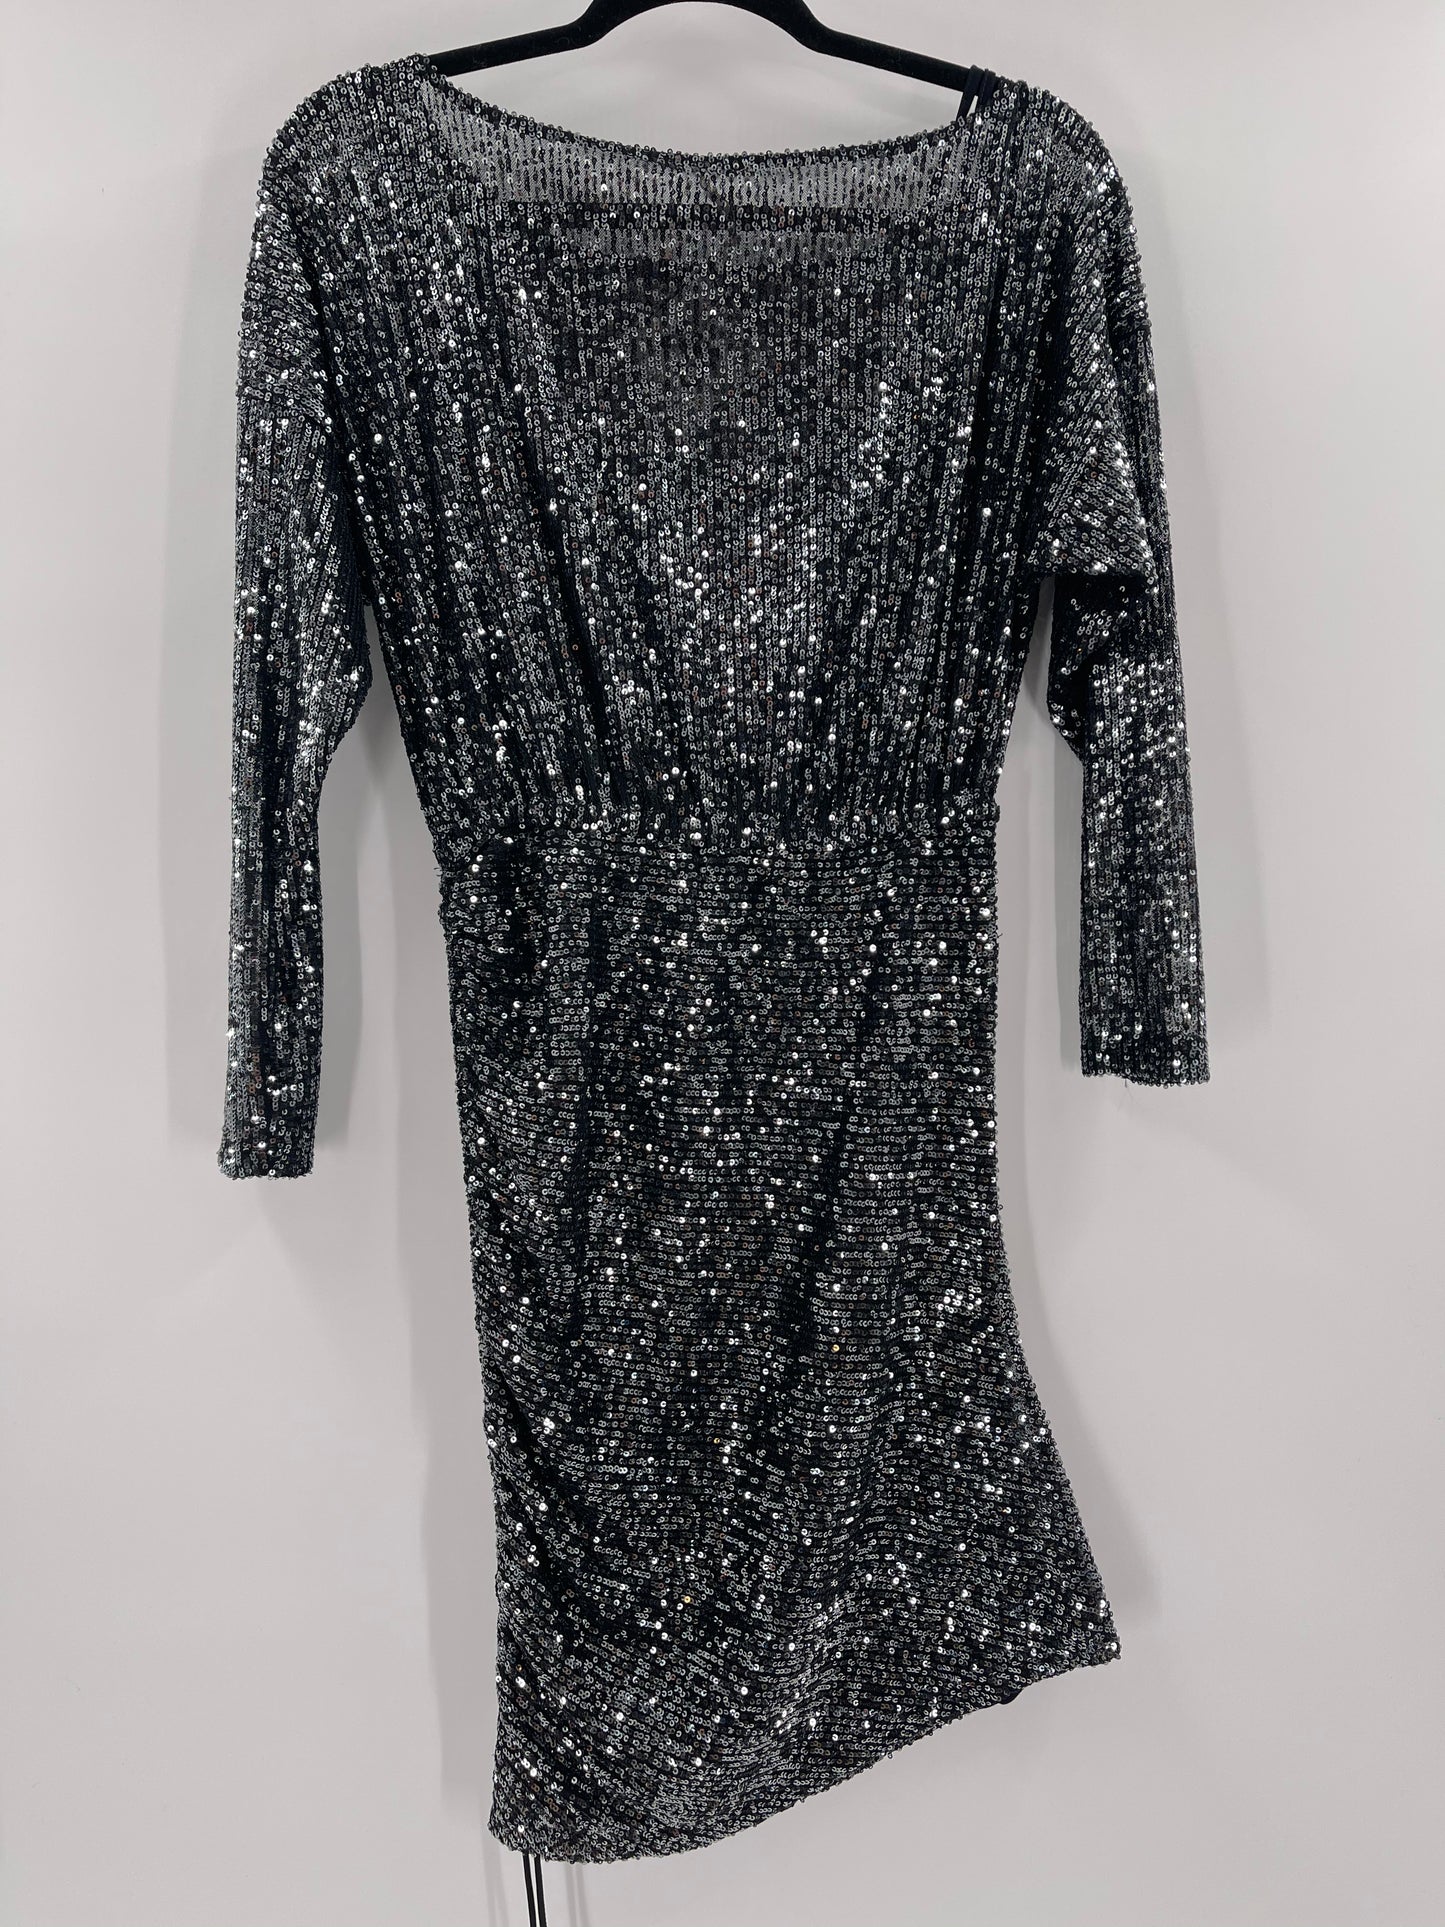 Free People Black/Silver Sequin Dress (XS)